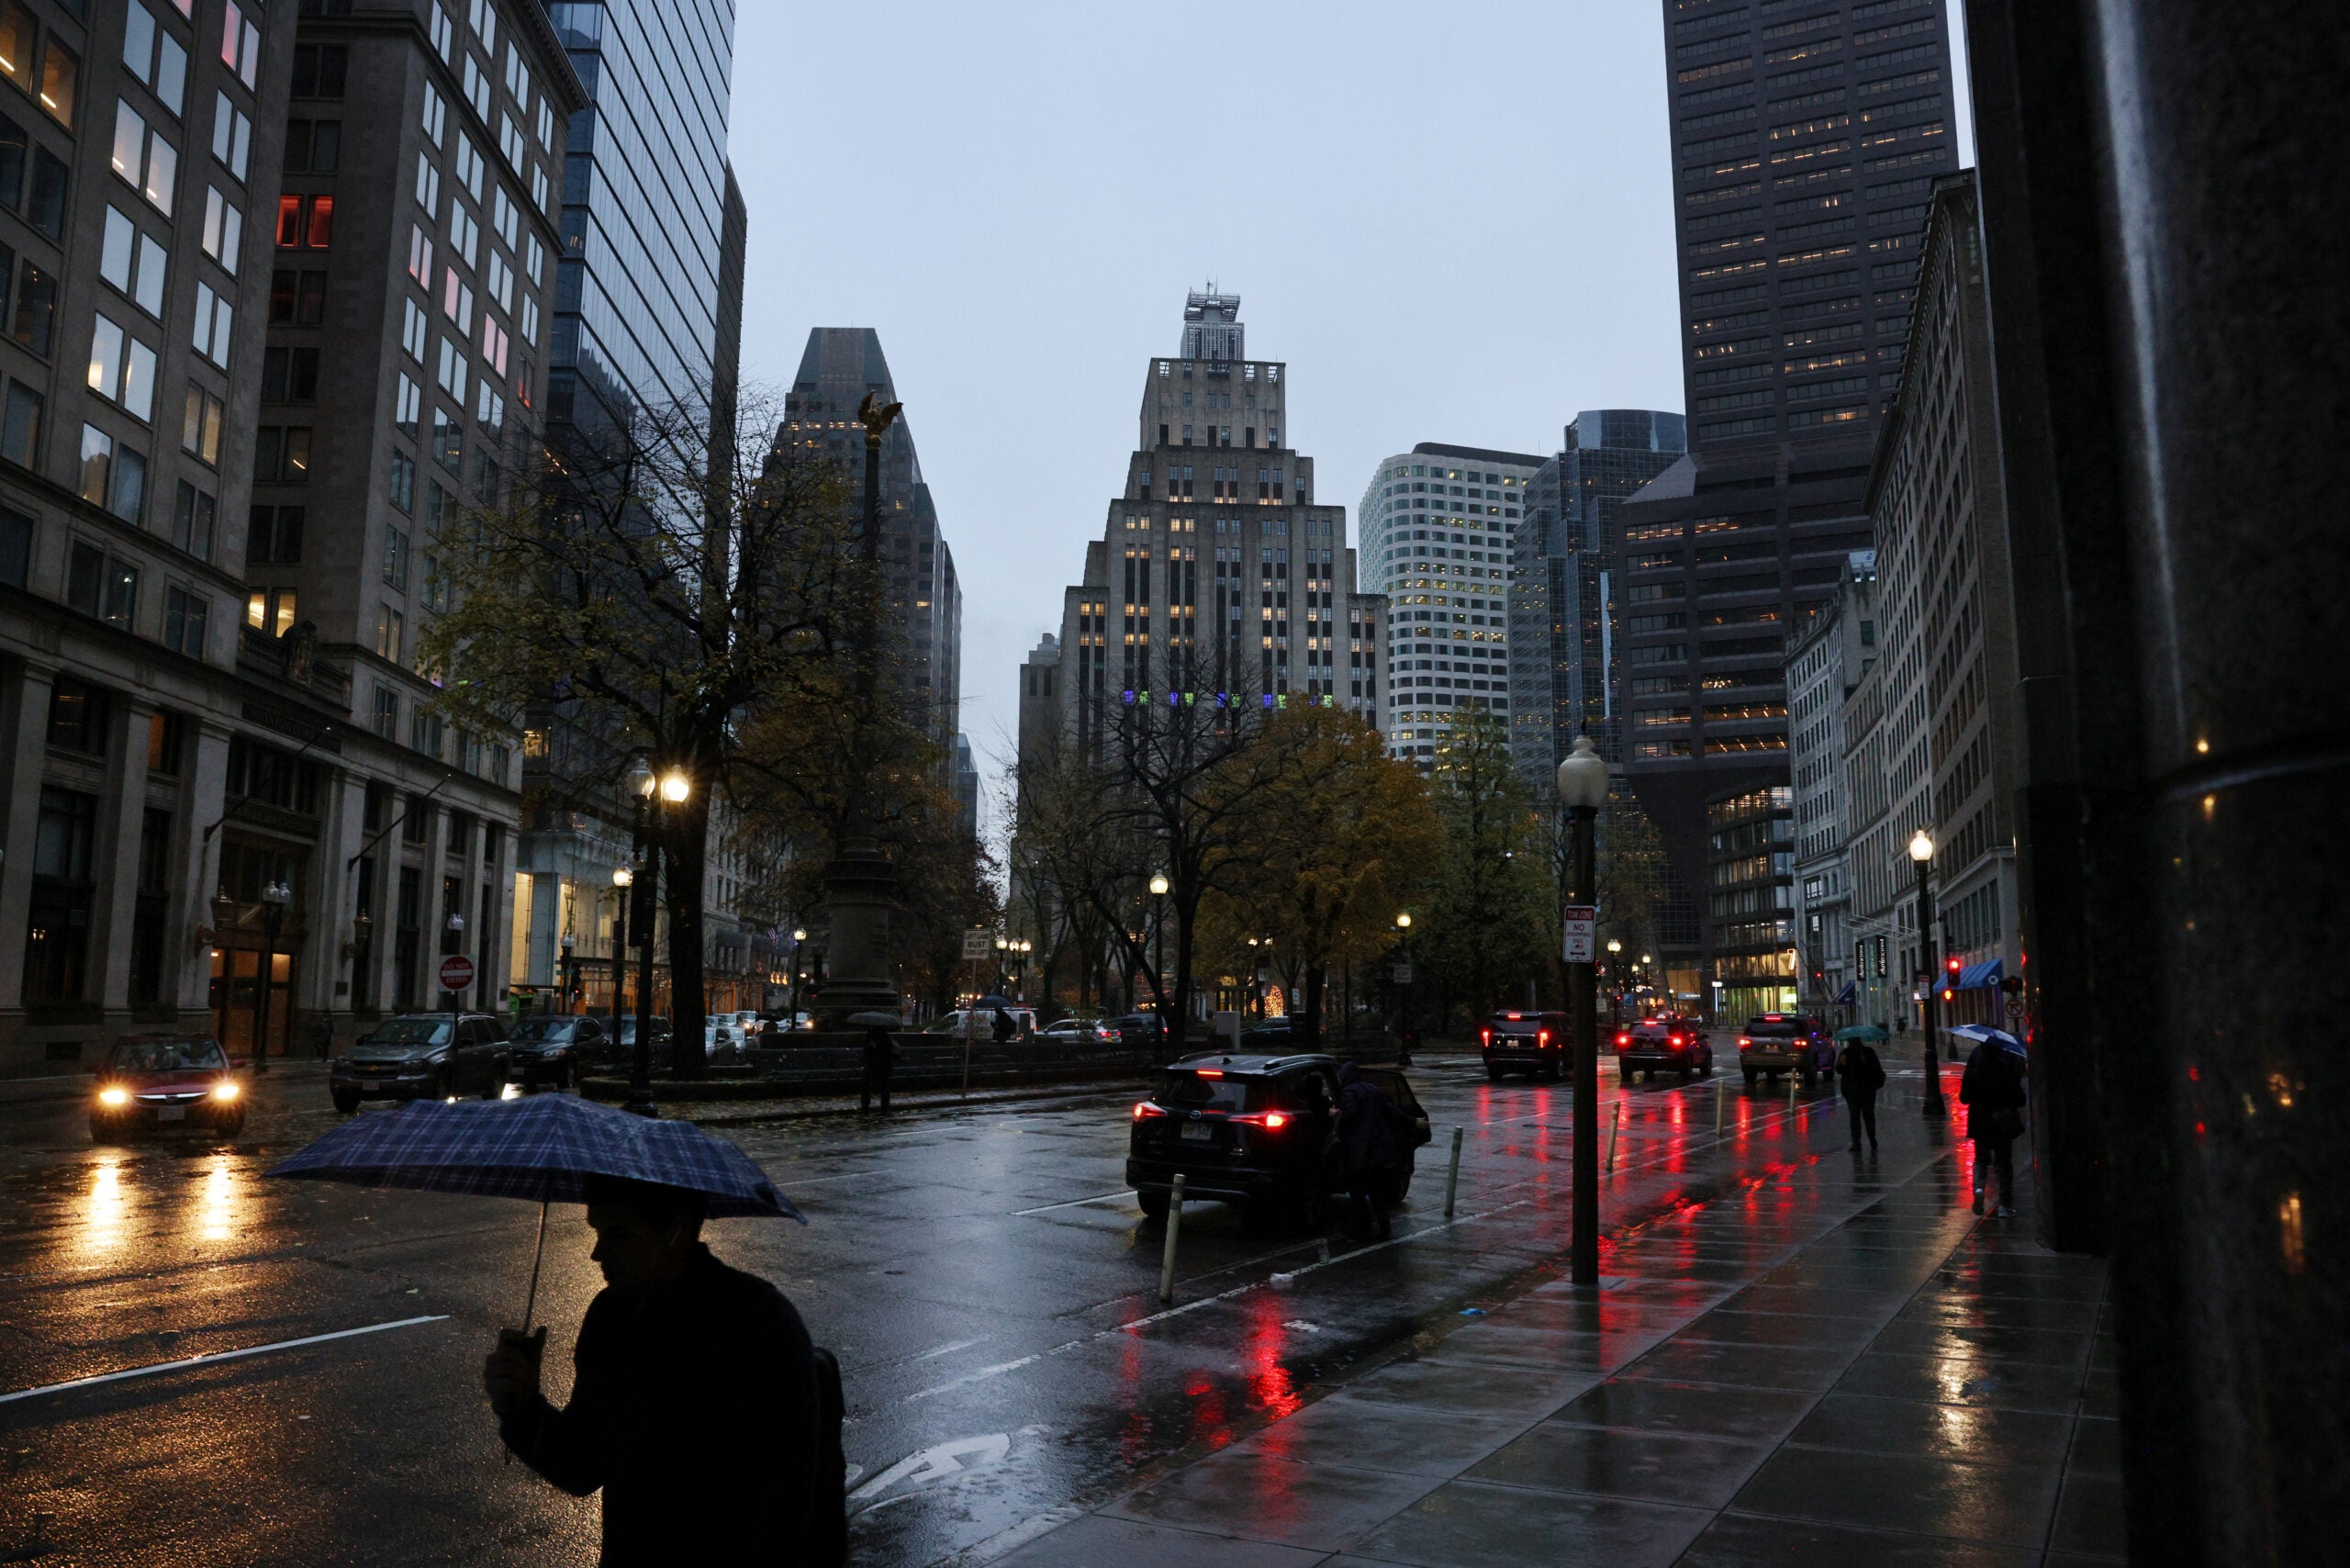 Boston weather: A pedestrian protects himself from the early morning rain in Post Office Square